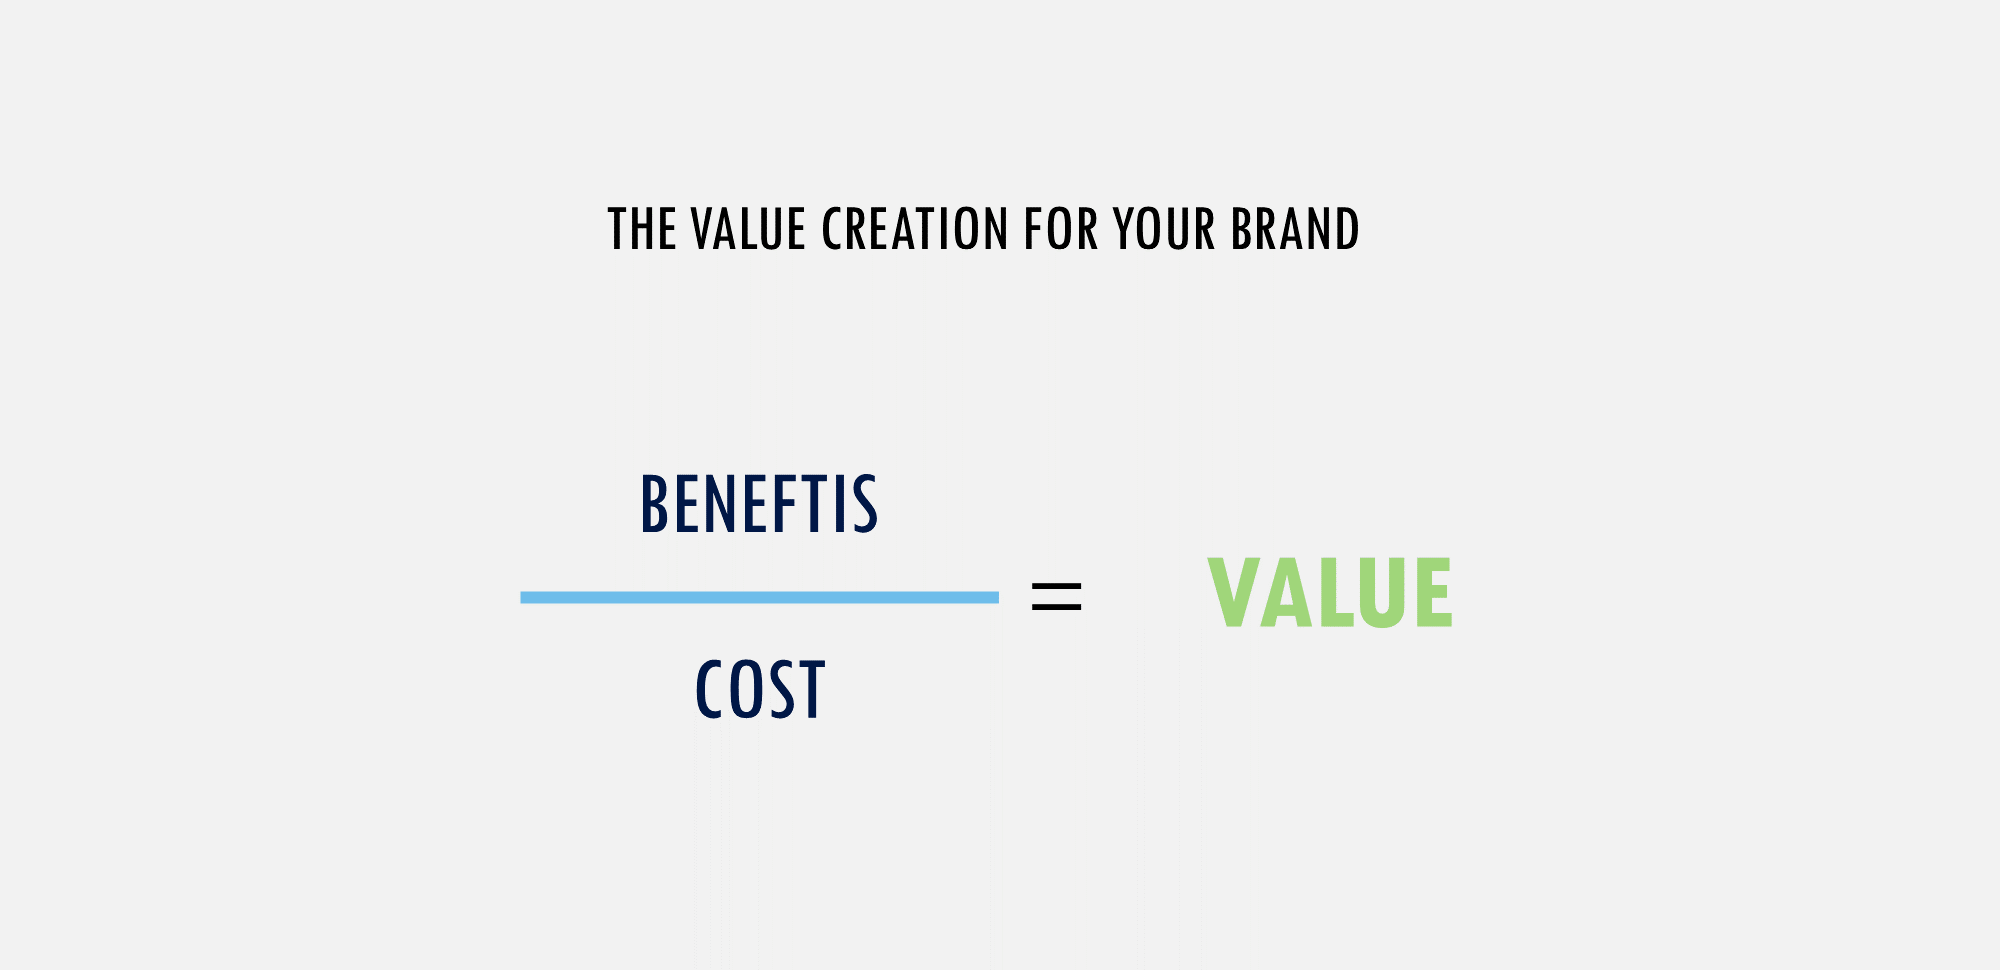 Value Creation of your brand